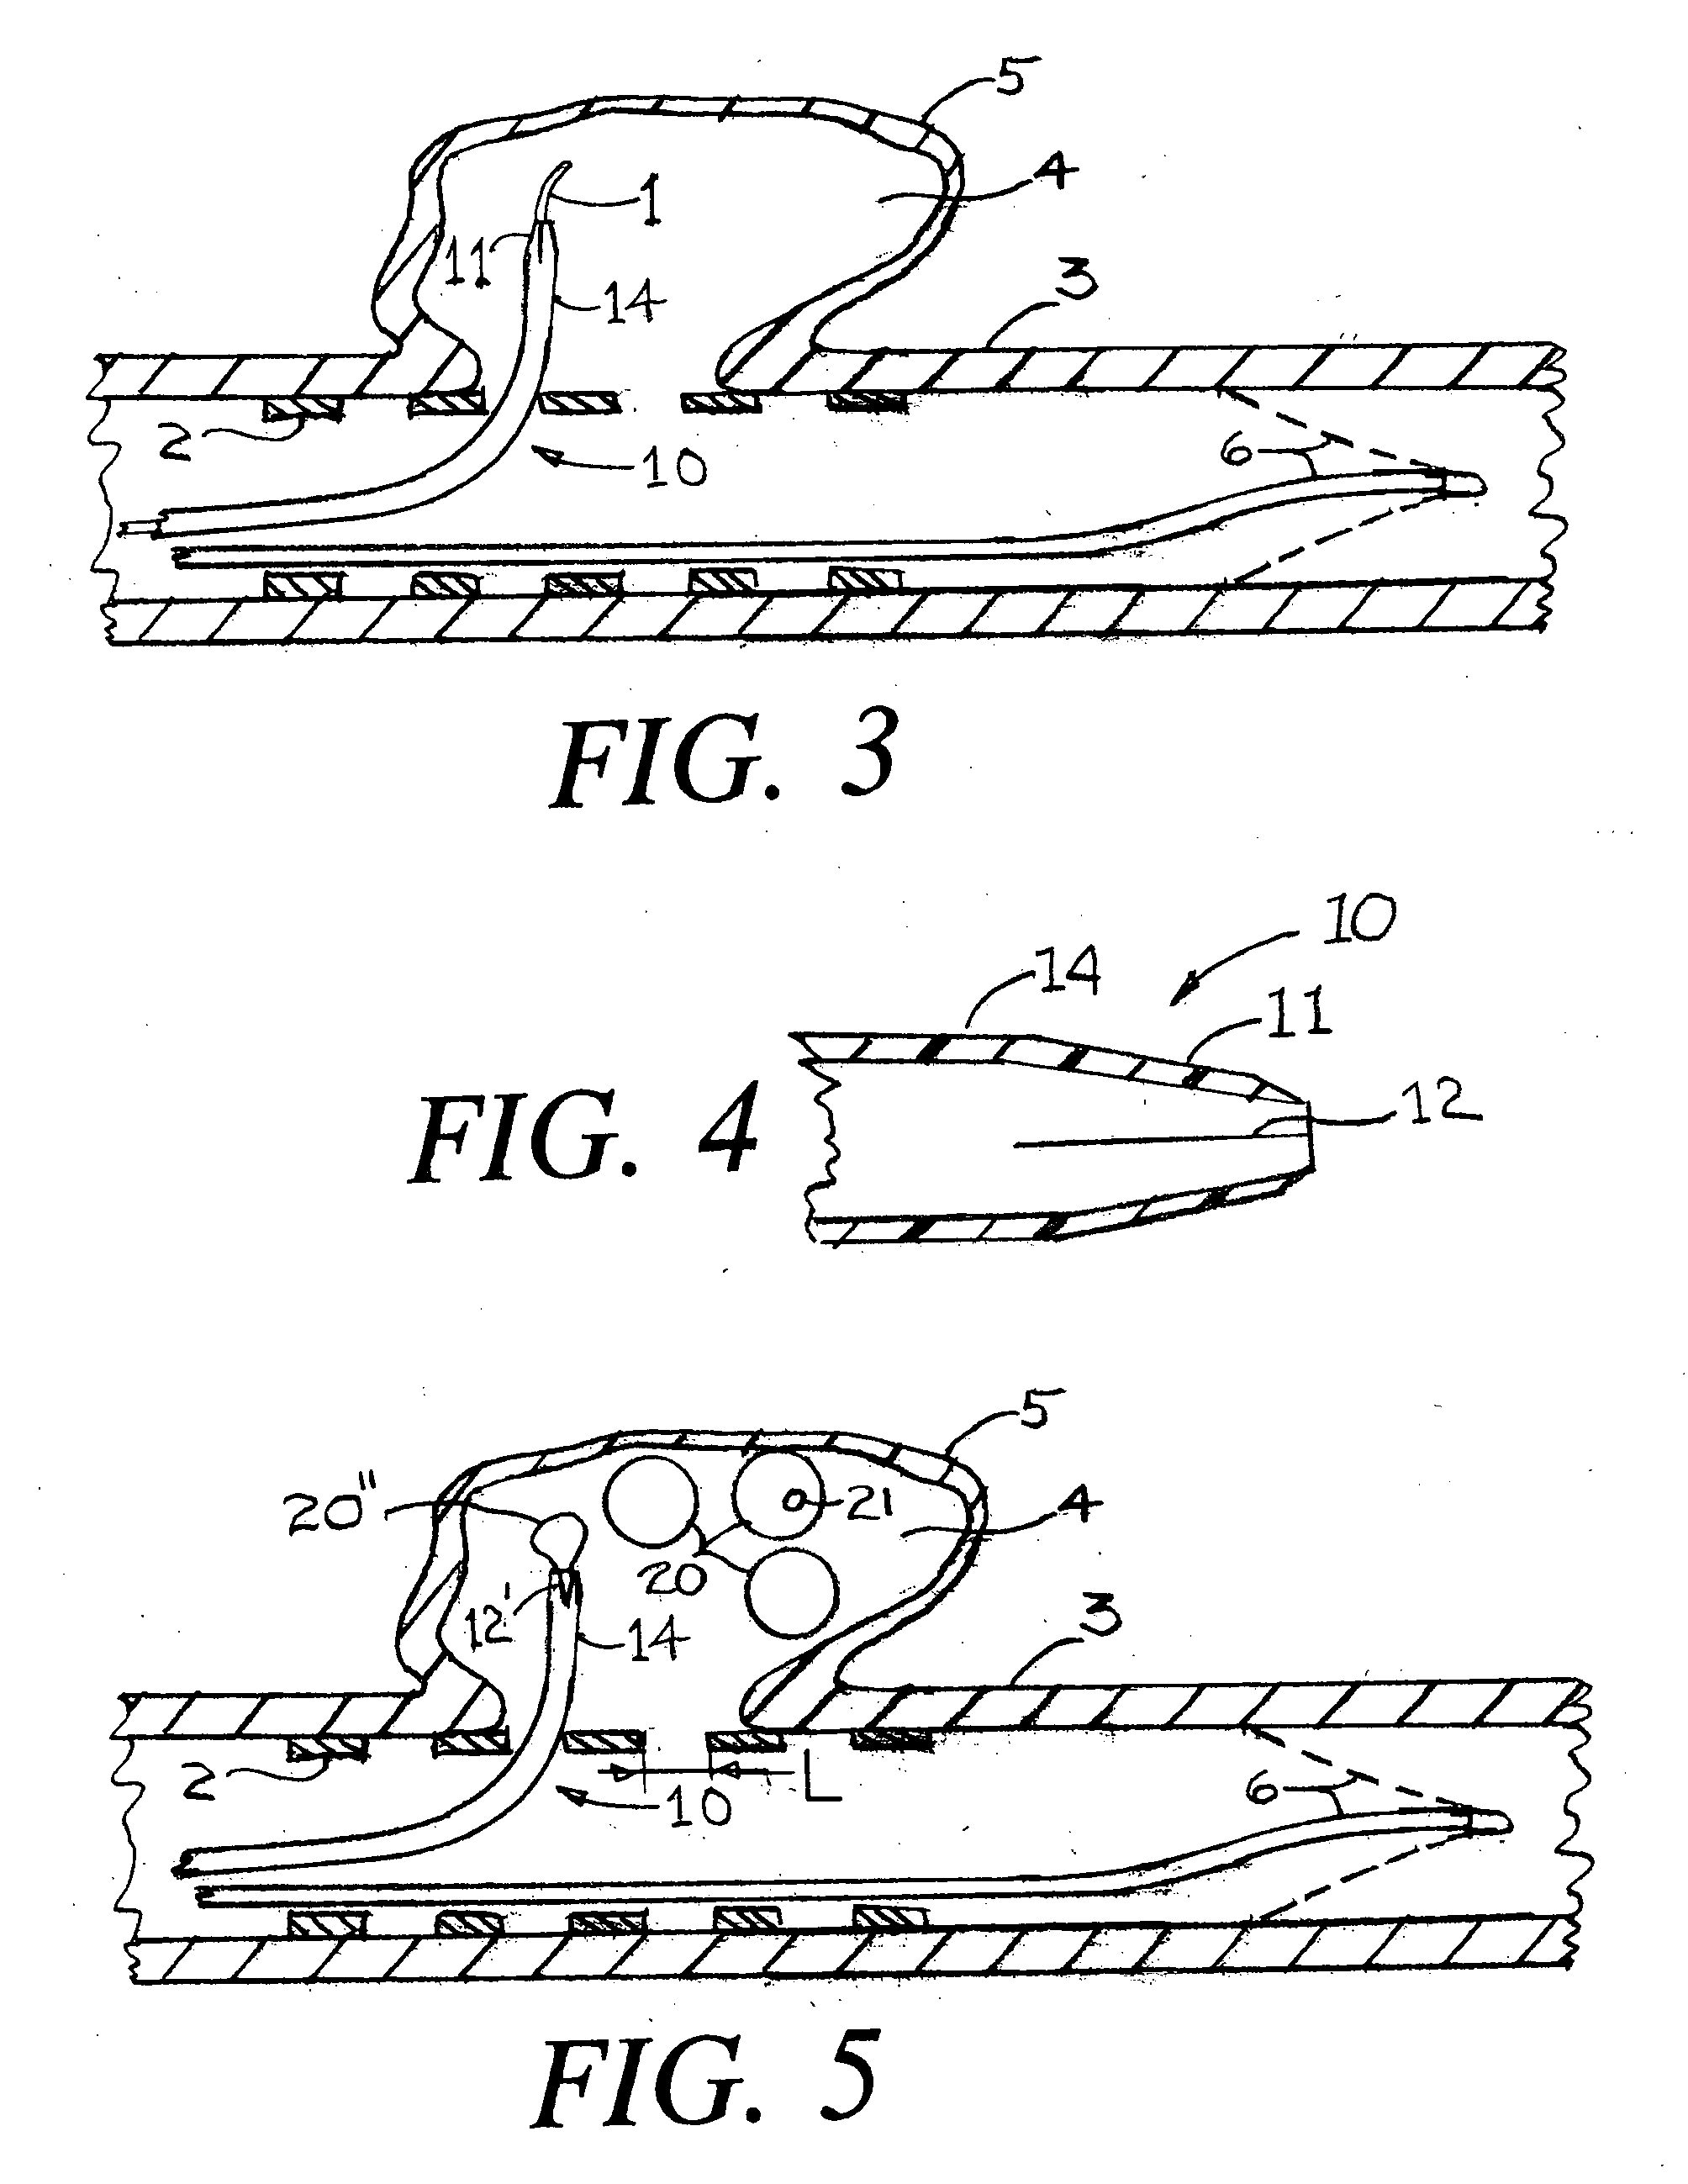 Means and method for the treatment of cerebral aneurysms